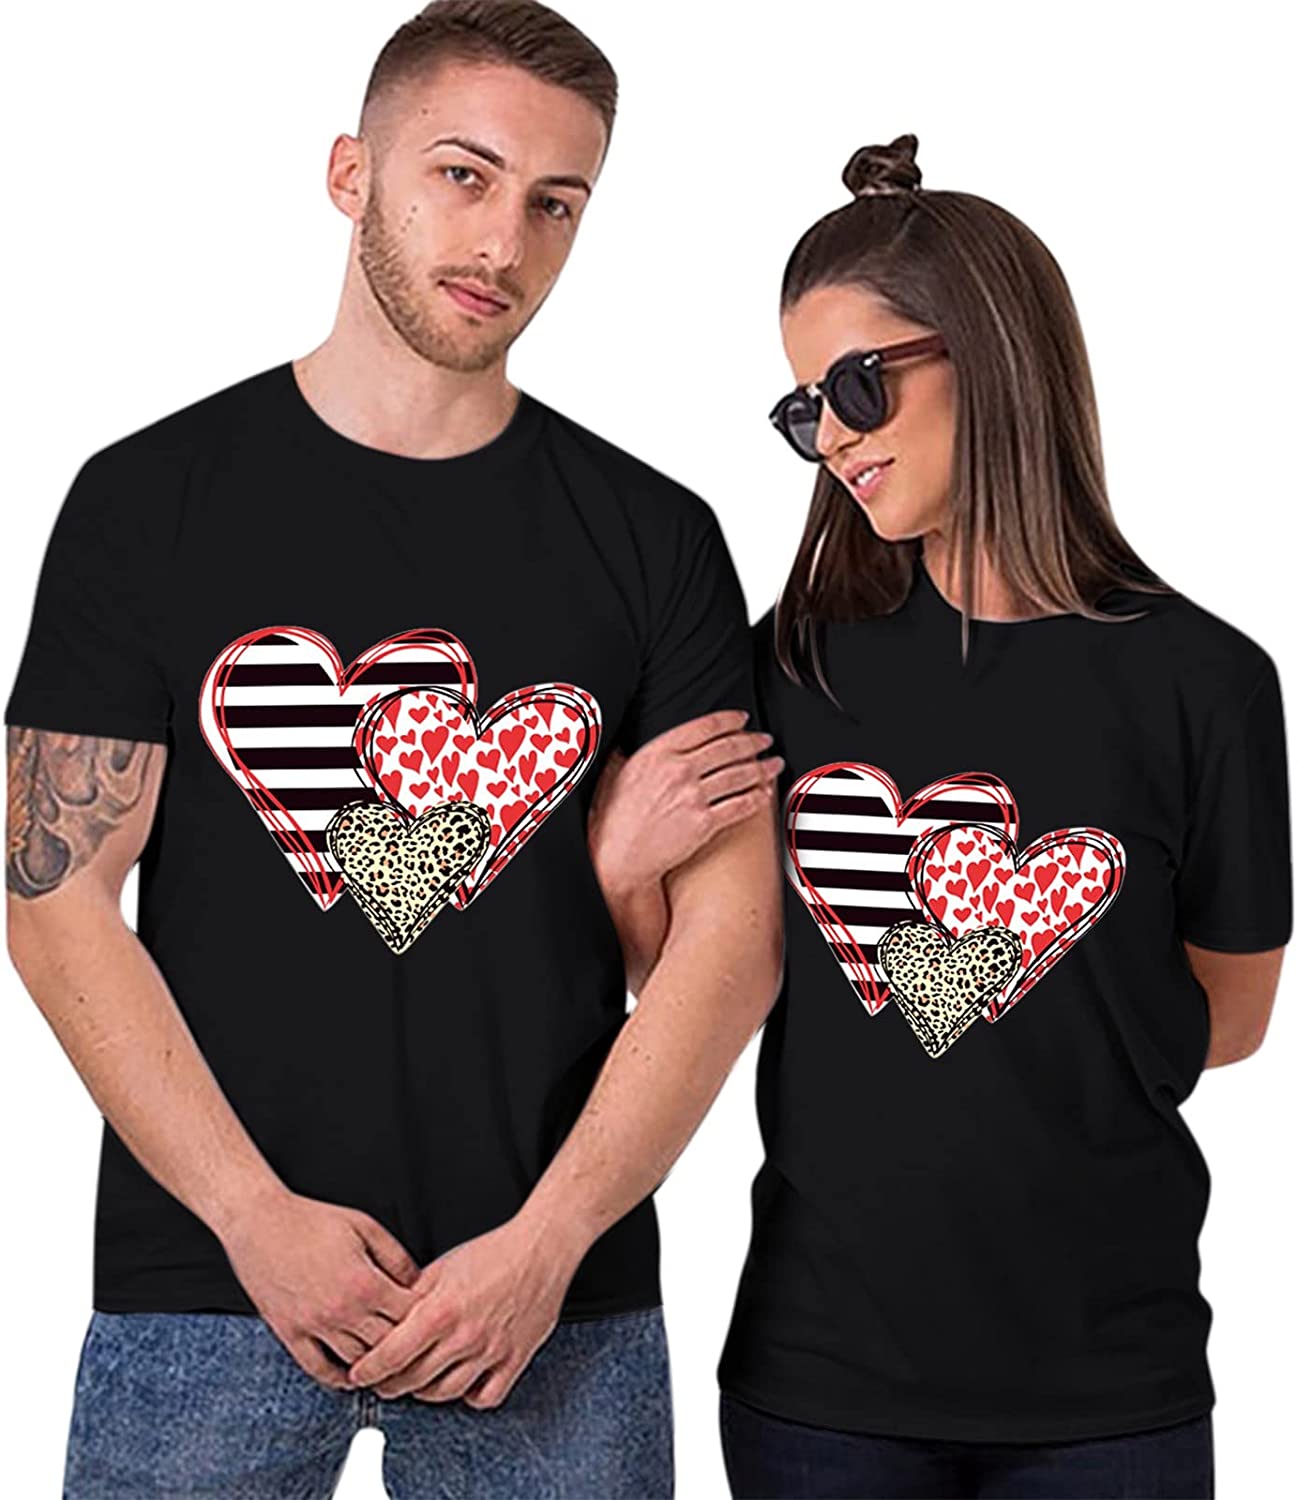  Meaningful Xmas t shirts for couples